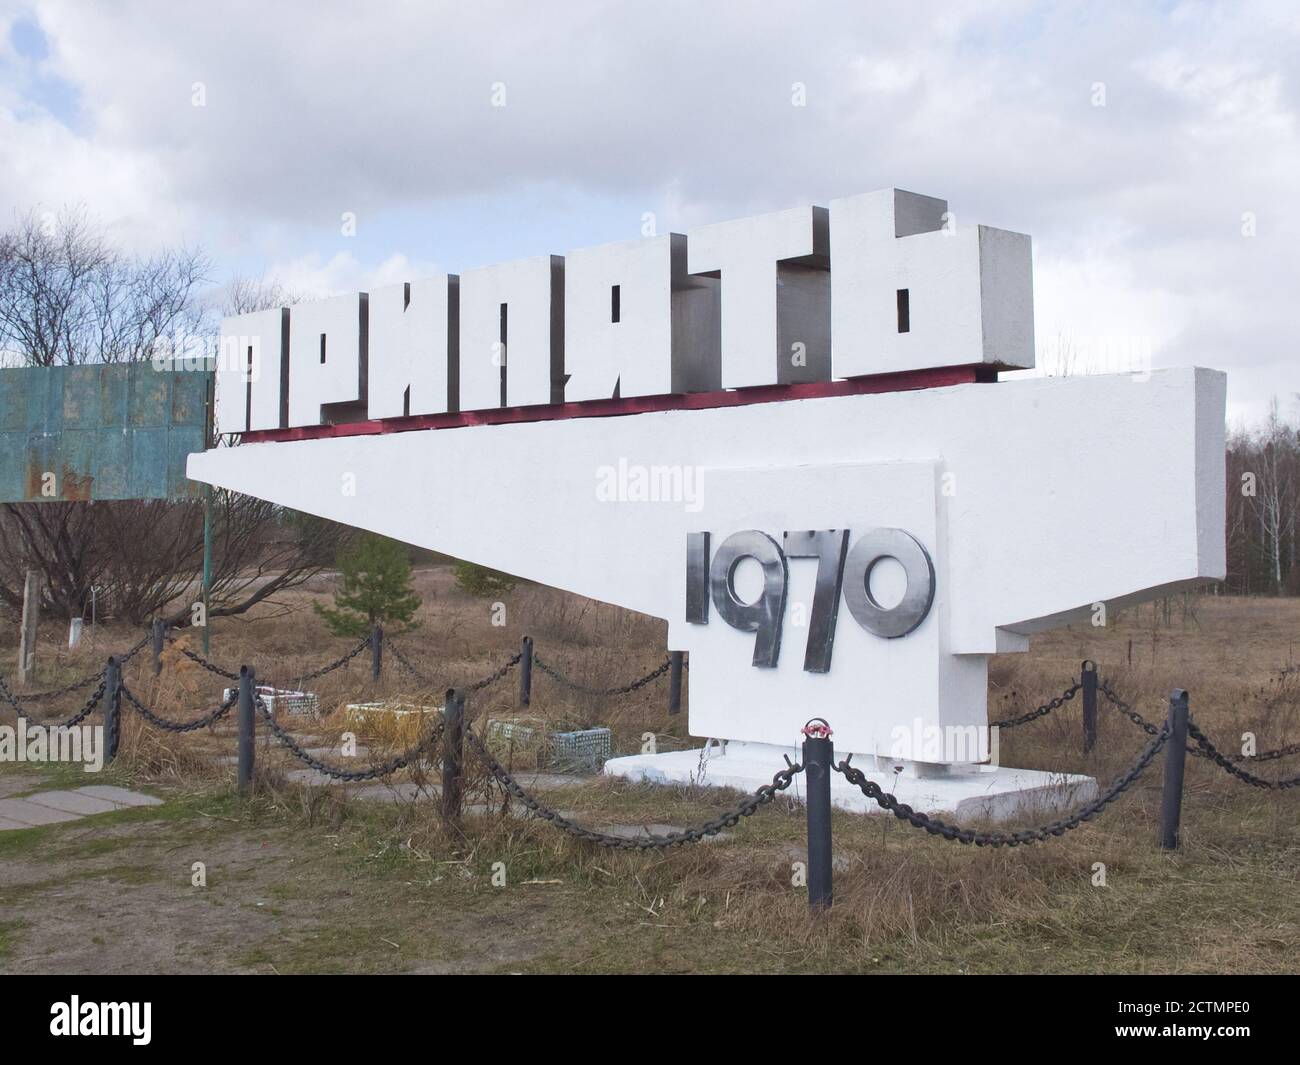 Chernobyl exclusion zone. Ruins of abandoned Pripyat city. Autumn in zone of exclusion. Pripyat sign. Text in russian: Pripyat (name of the city). Stock Photo